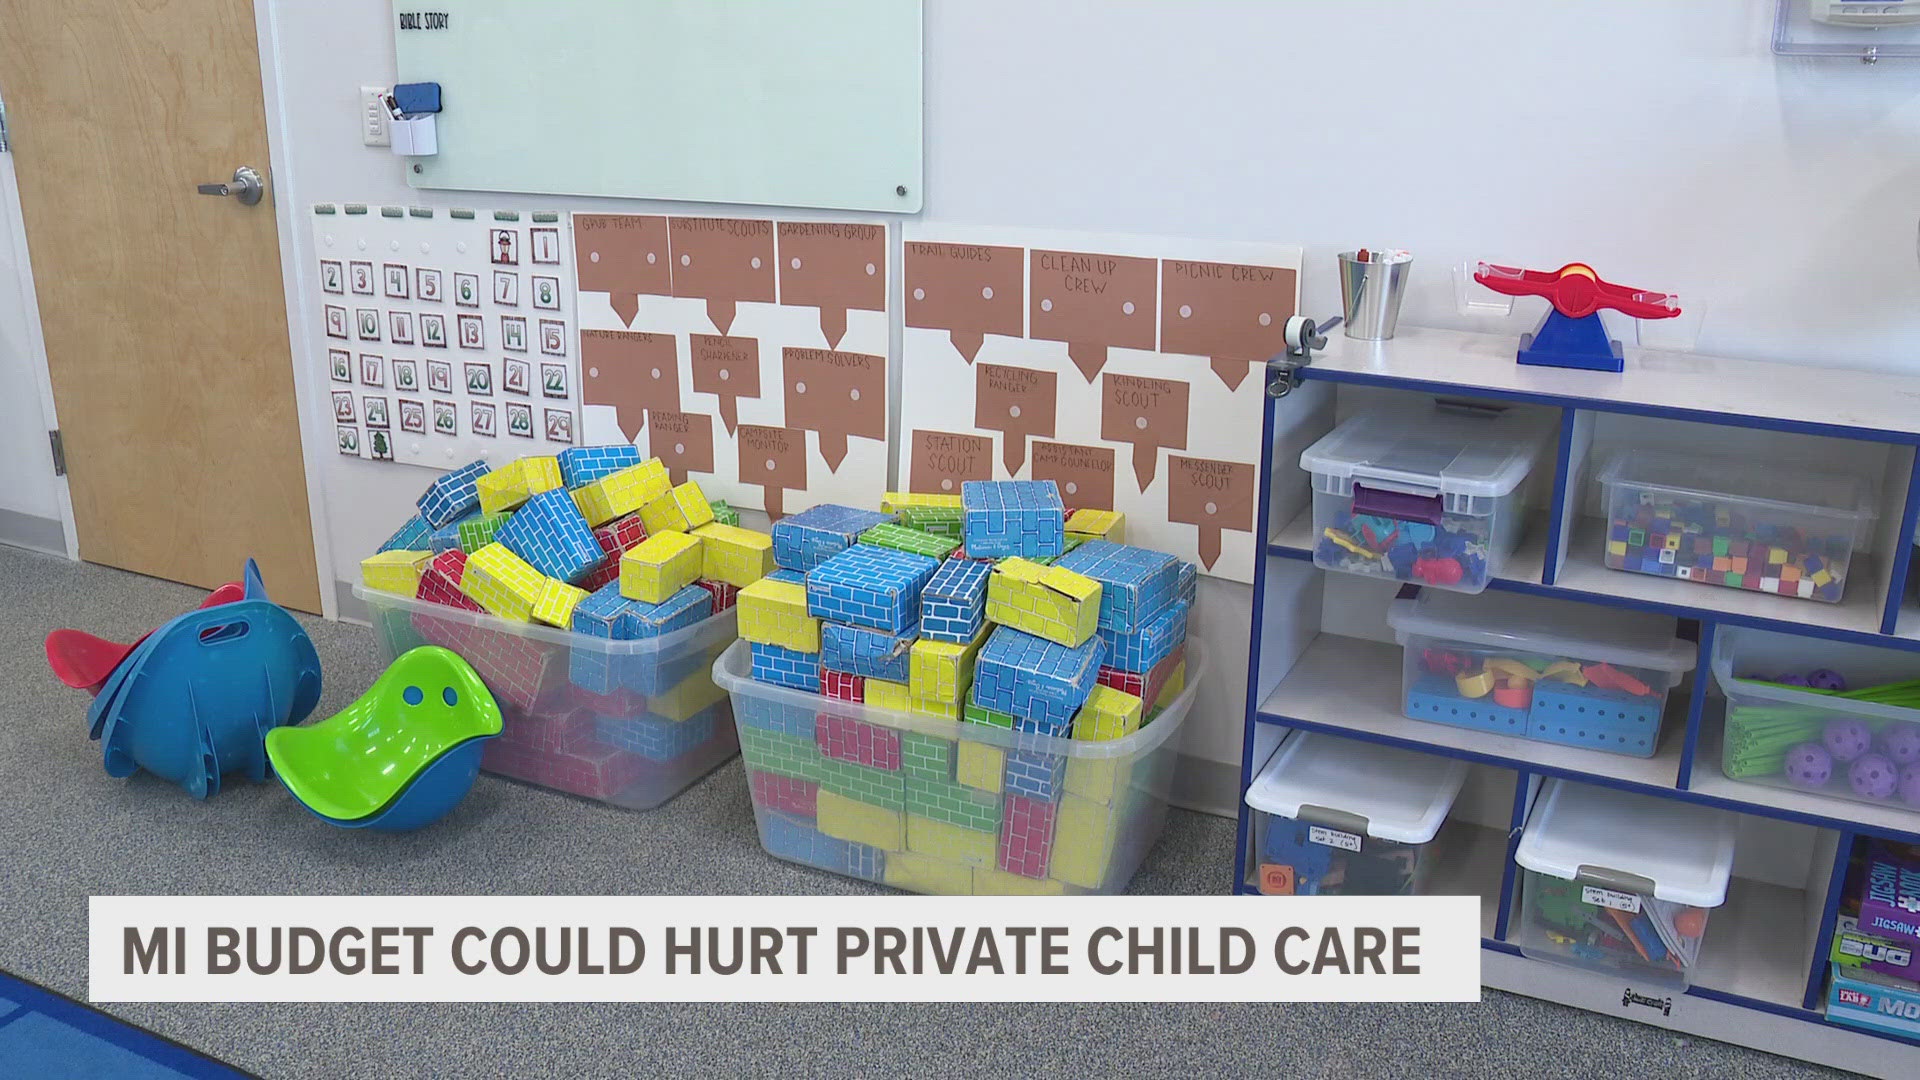 While Gov. Whitmer wants to expand state-funded pre-K and give more help to local childcare providers, language in the House and Senate budgets could negate that.